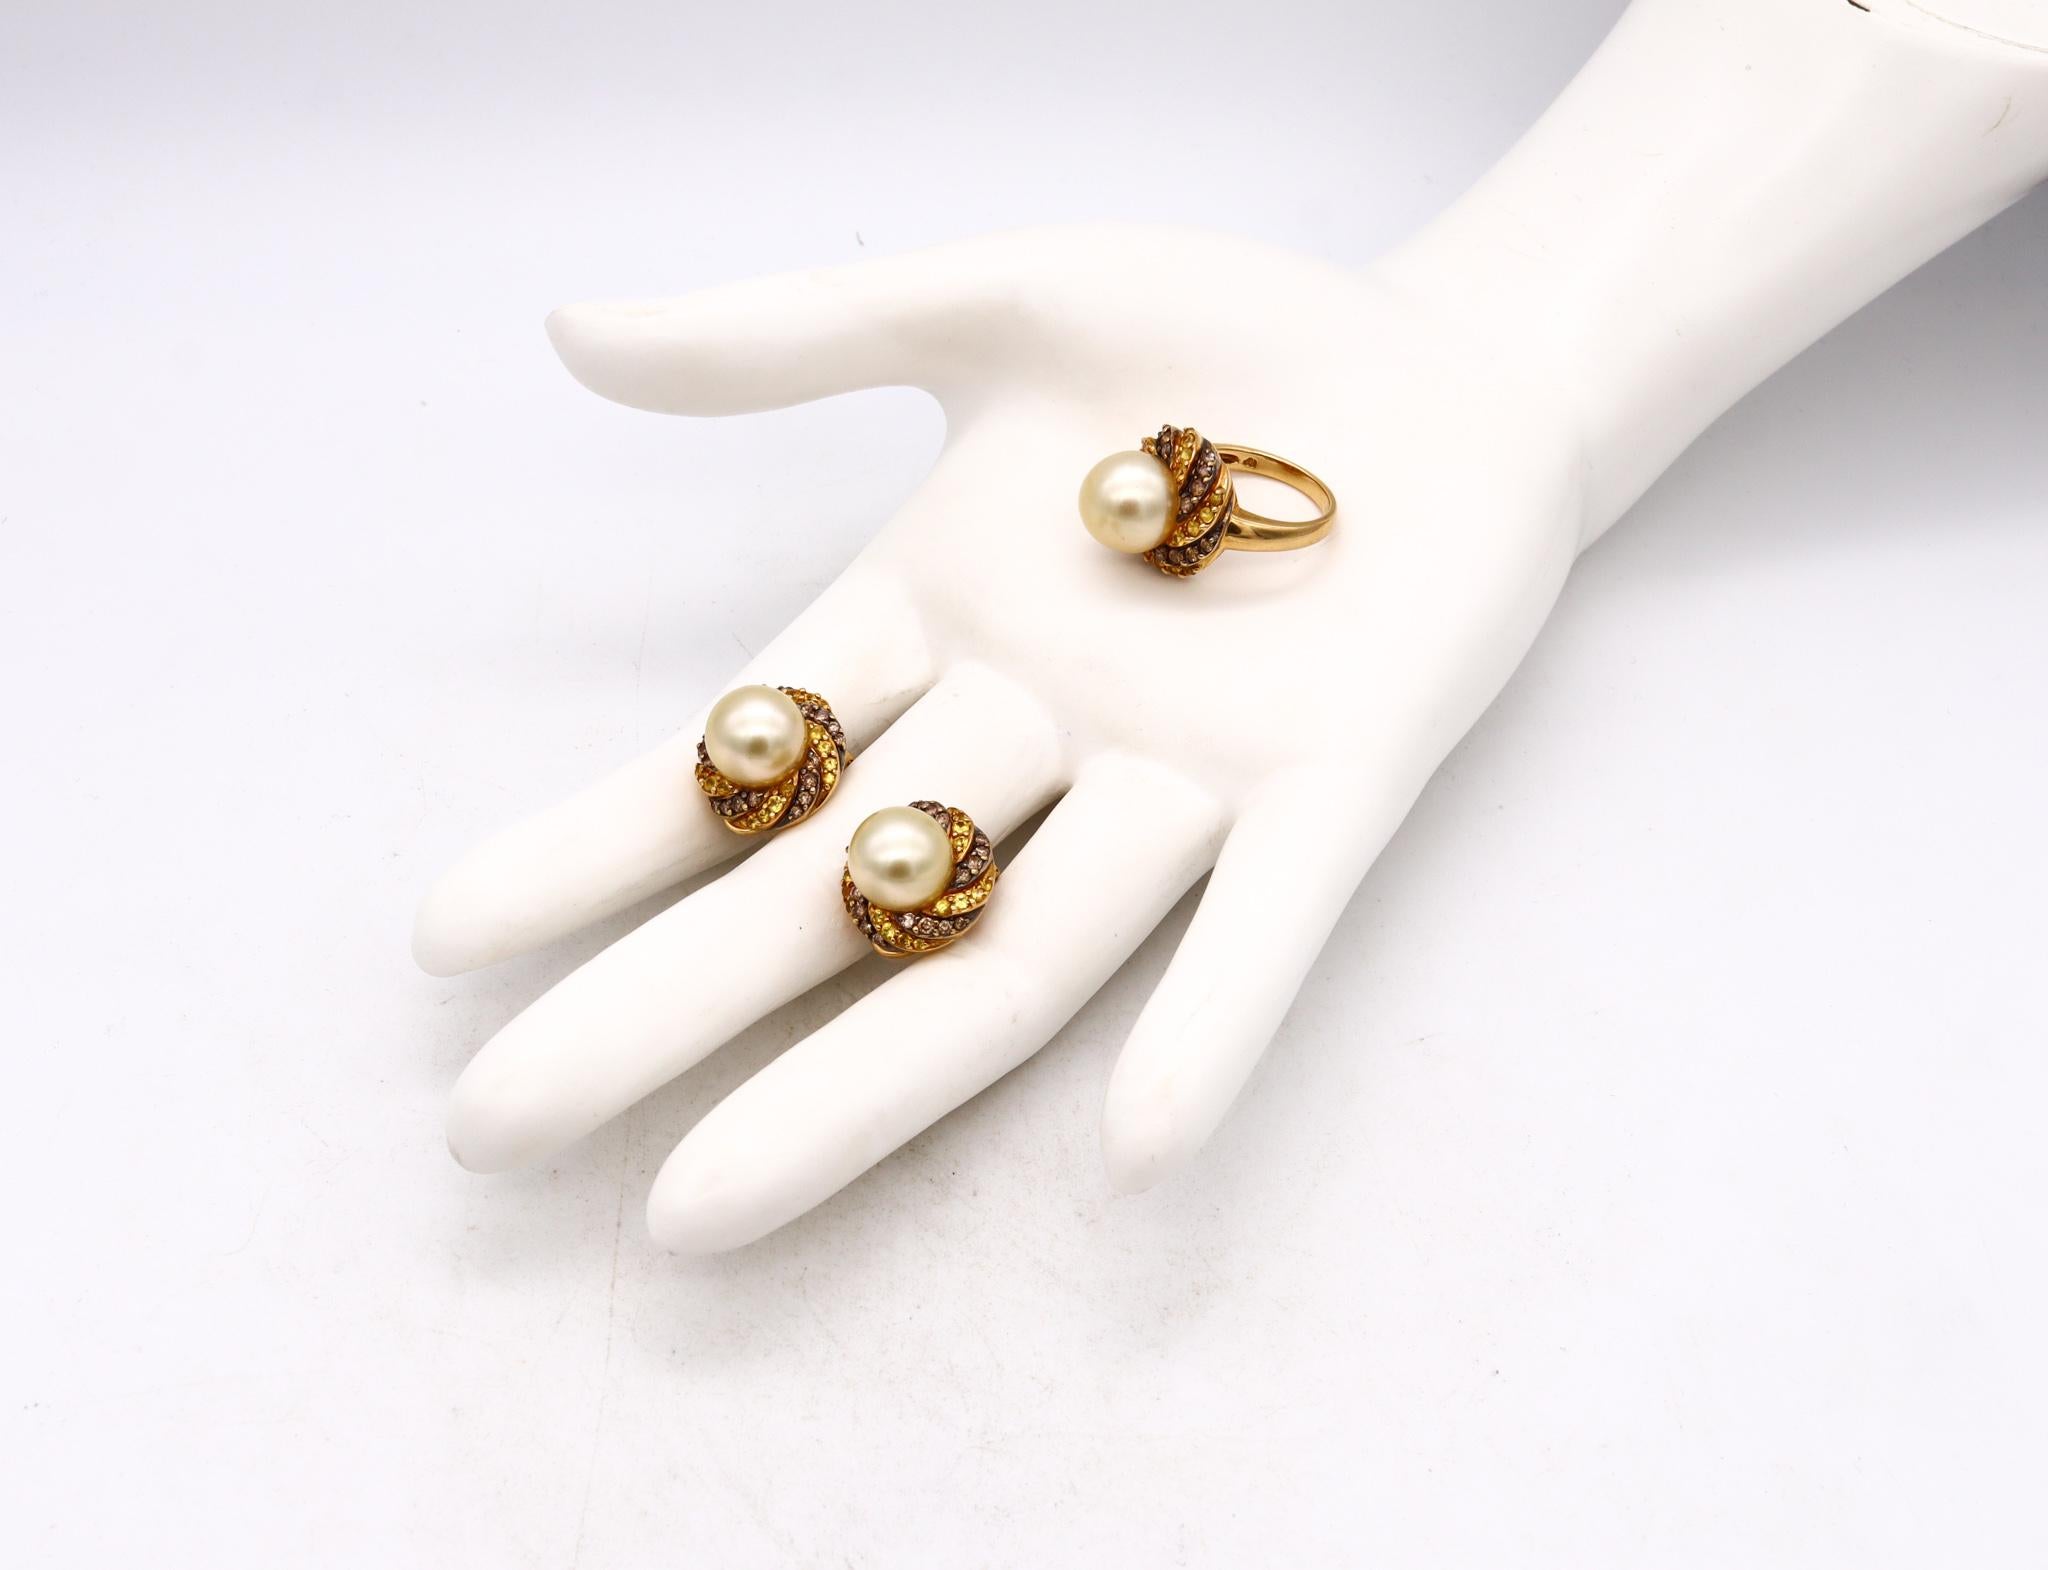 Akoya pearls suite of ring and earrings

Beautiful modern Italian suite, carefully crafted in solid yellow gold of 18 karats, with high polished finish. Each piece is mounted in the centers, with Akoya light golden round pearls of 12 mm. The centers